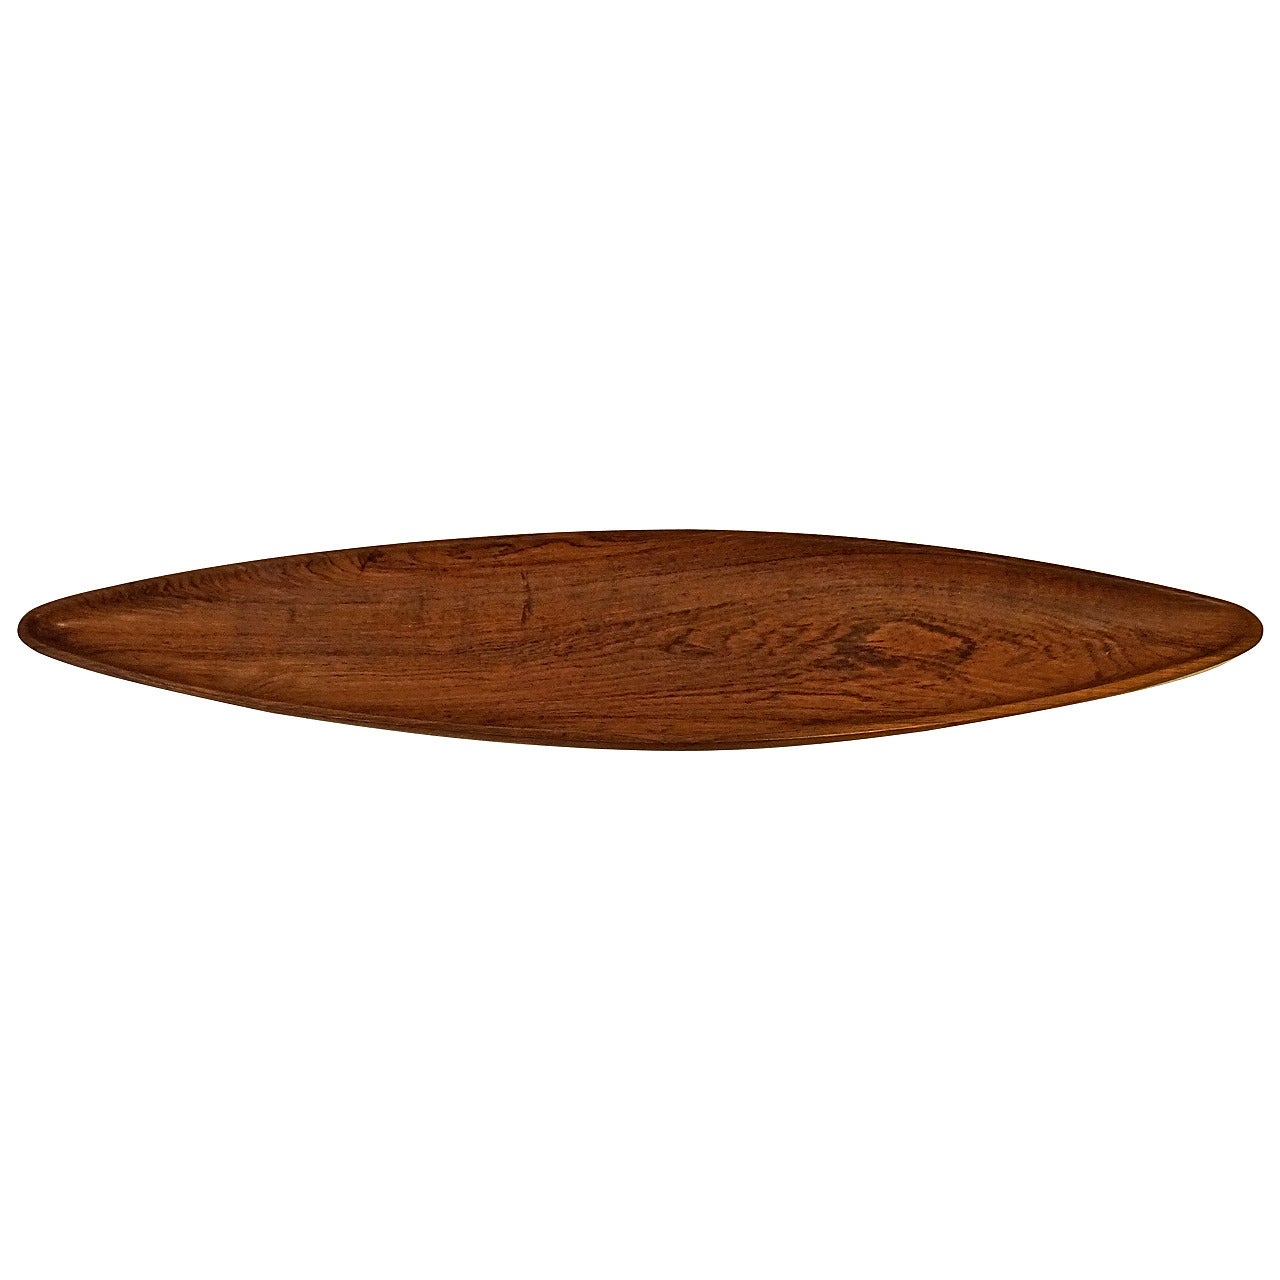 Rosewood Bowl from the Lunning Collection